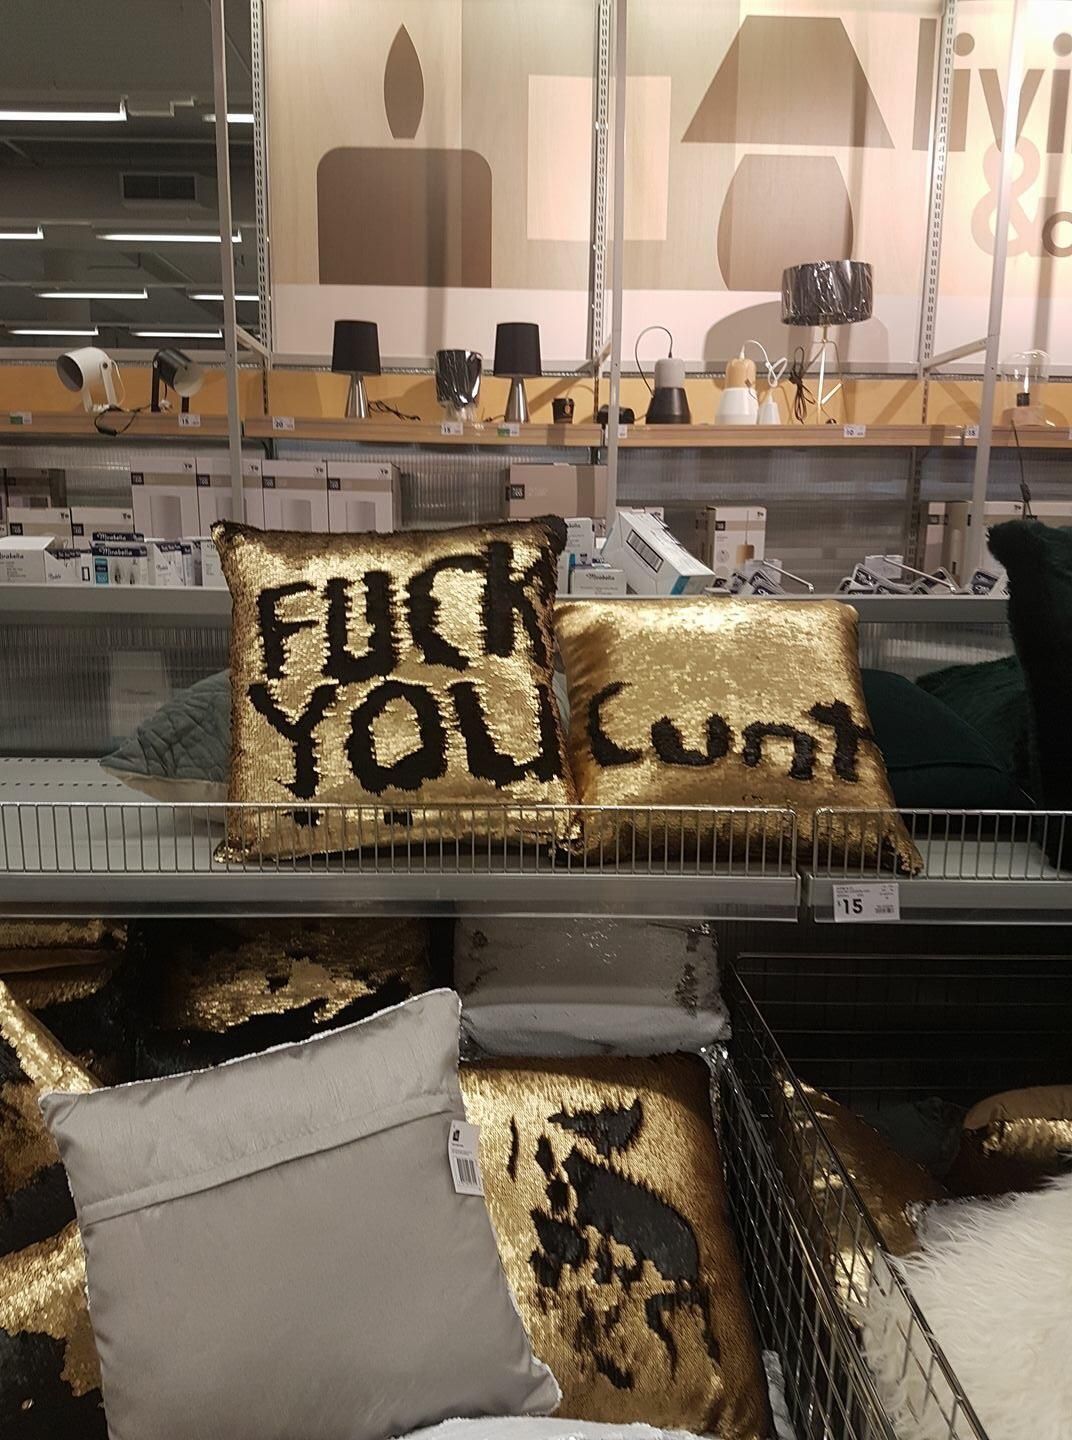 Meanwhile at a Target in Australia...